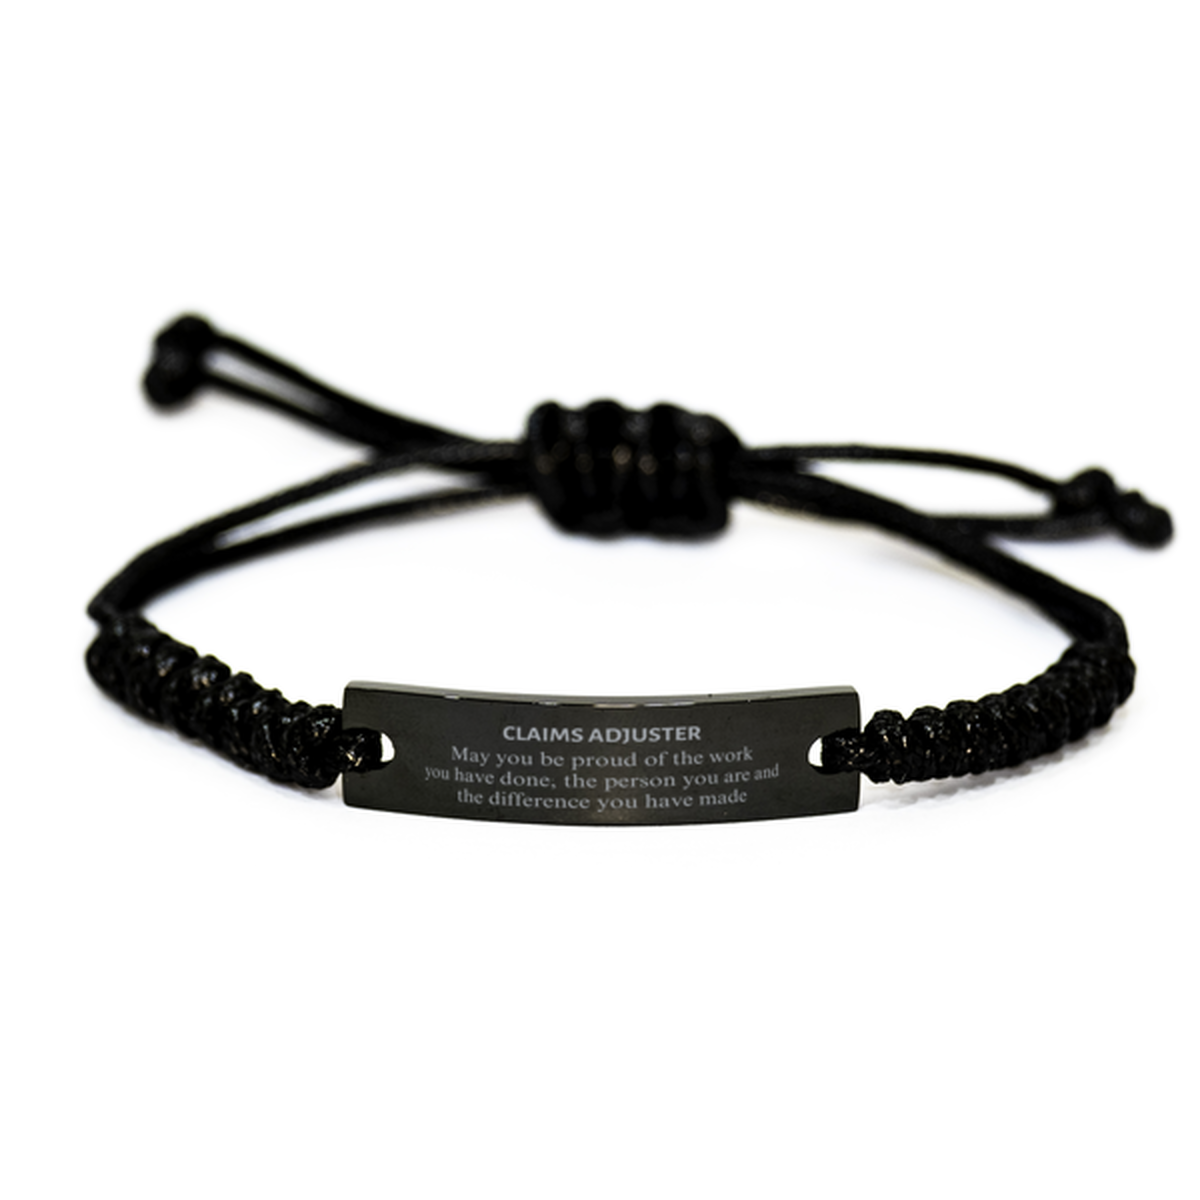 Claims Adjuster May you be proud of the work you have done, Retirement Claims Adjuster Black Rope Bracelet for Colleague Appreciation Gifts Amazing for Claims Adjuster